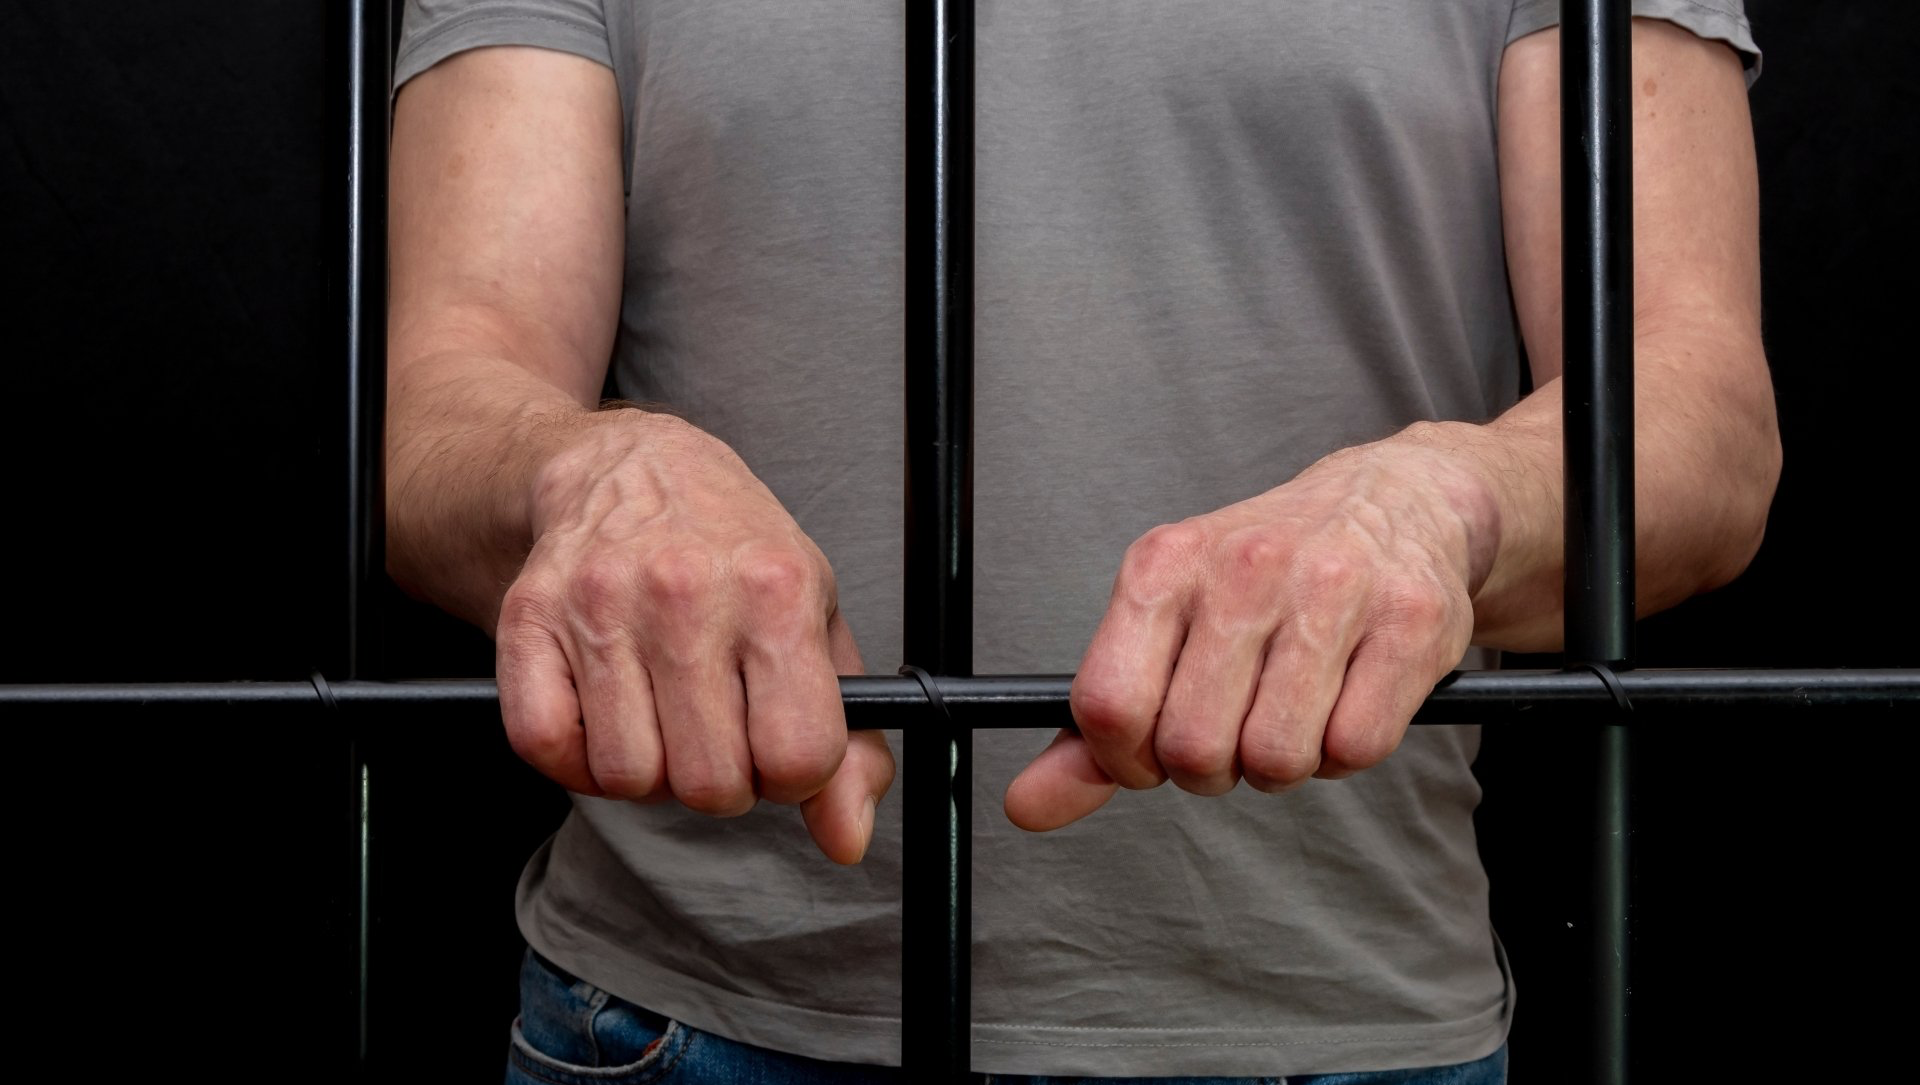 How a Criminal Conviction Can Impact Your Future